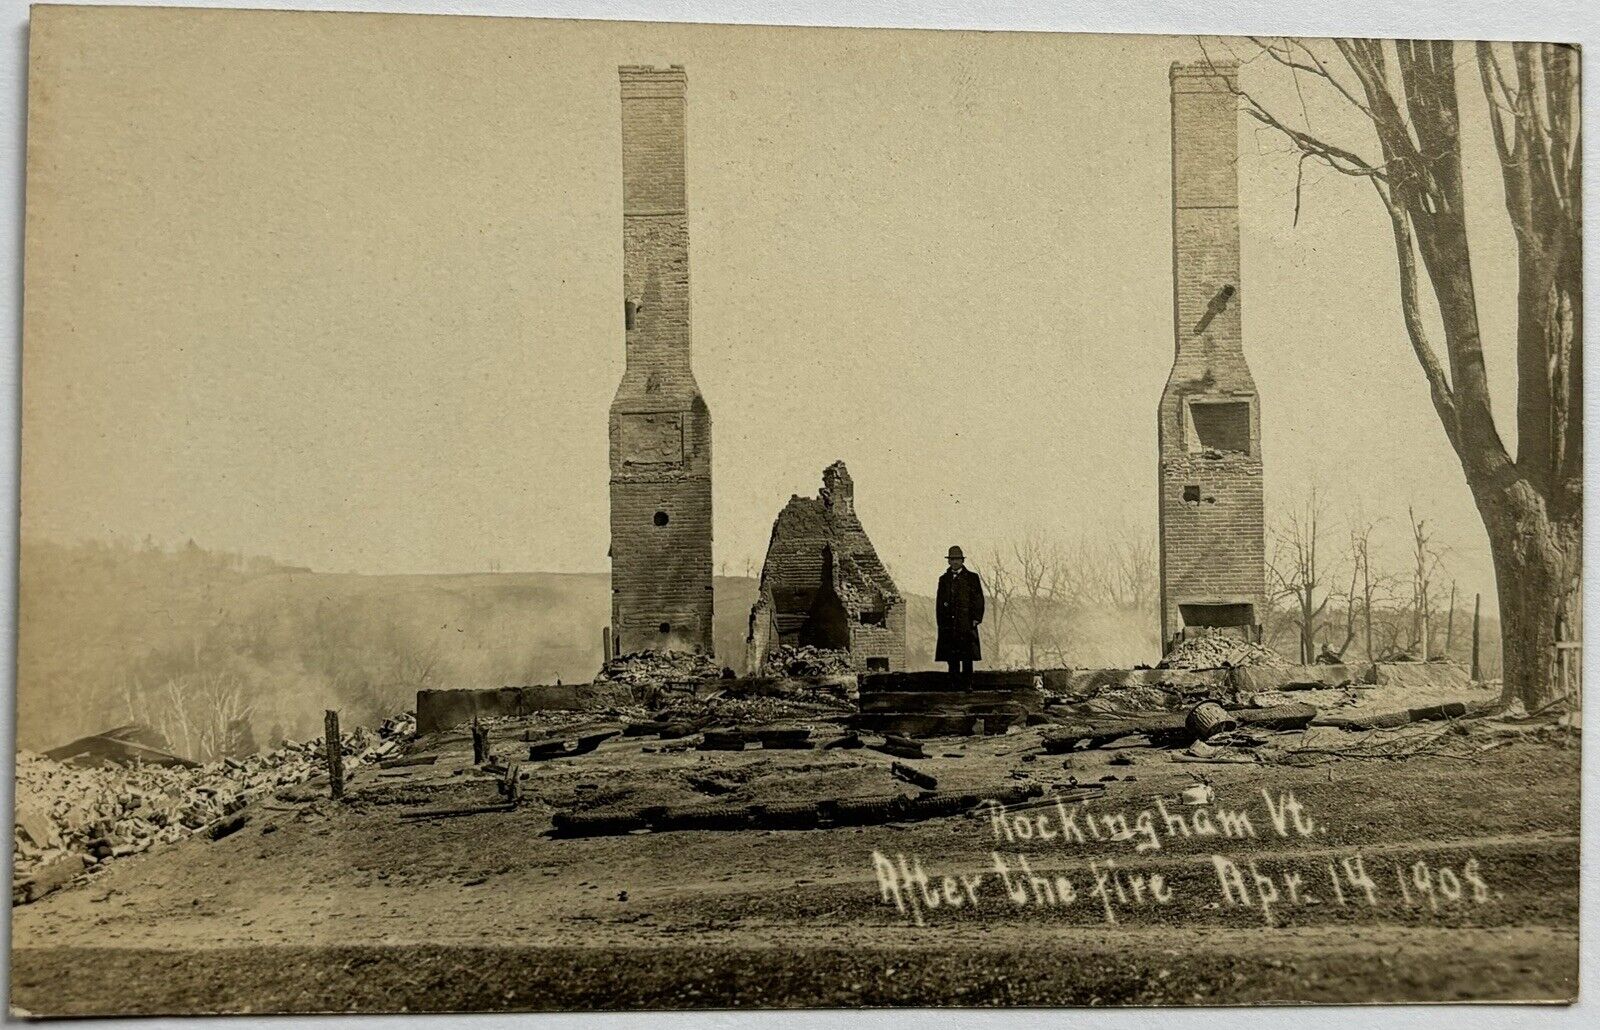 Rare April 14, 1908 Rockingham, Vermont Real Photo Postcard “After the Fire”